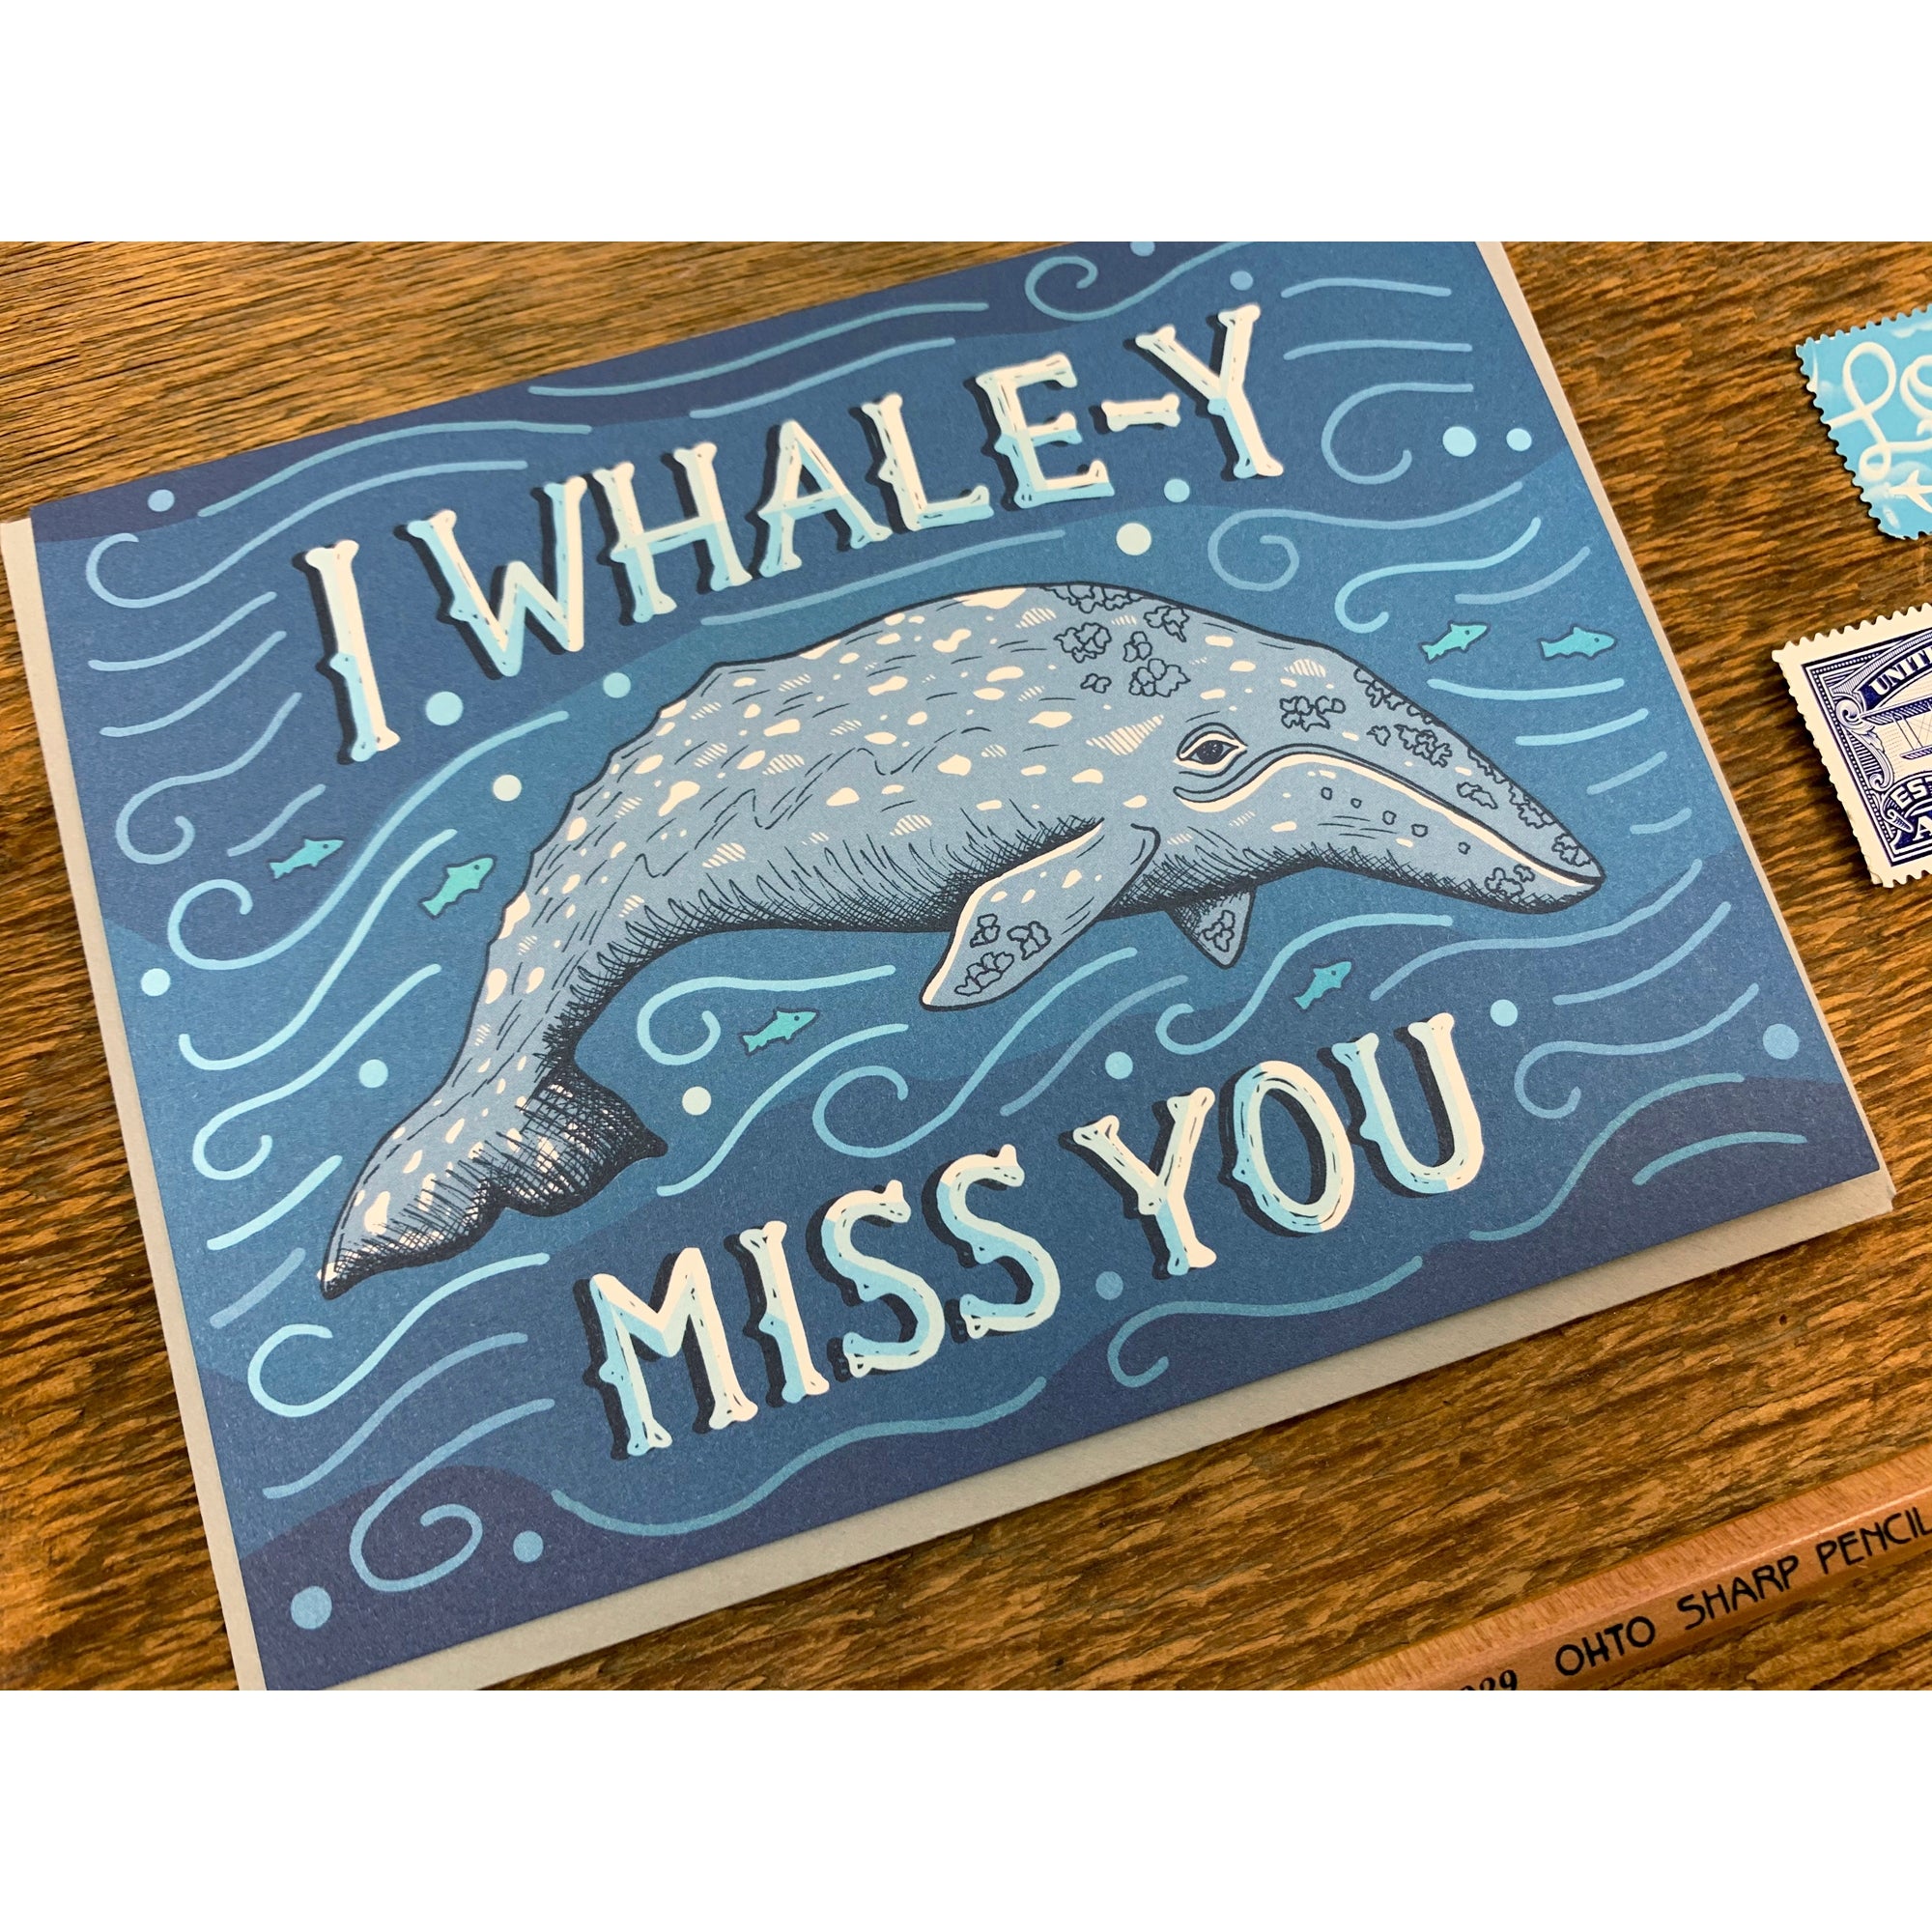 Whaley Miss You Card by Noteworthy Paper & Press - Harold&Charles